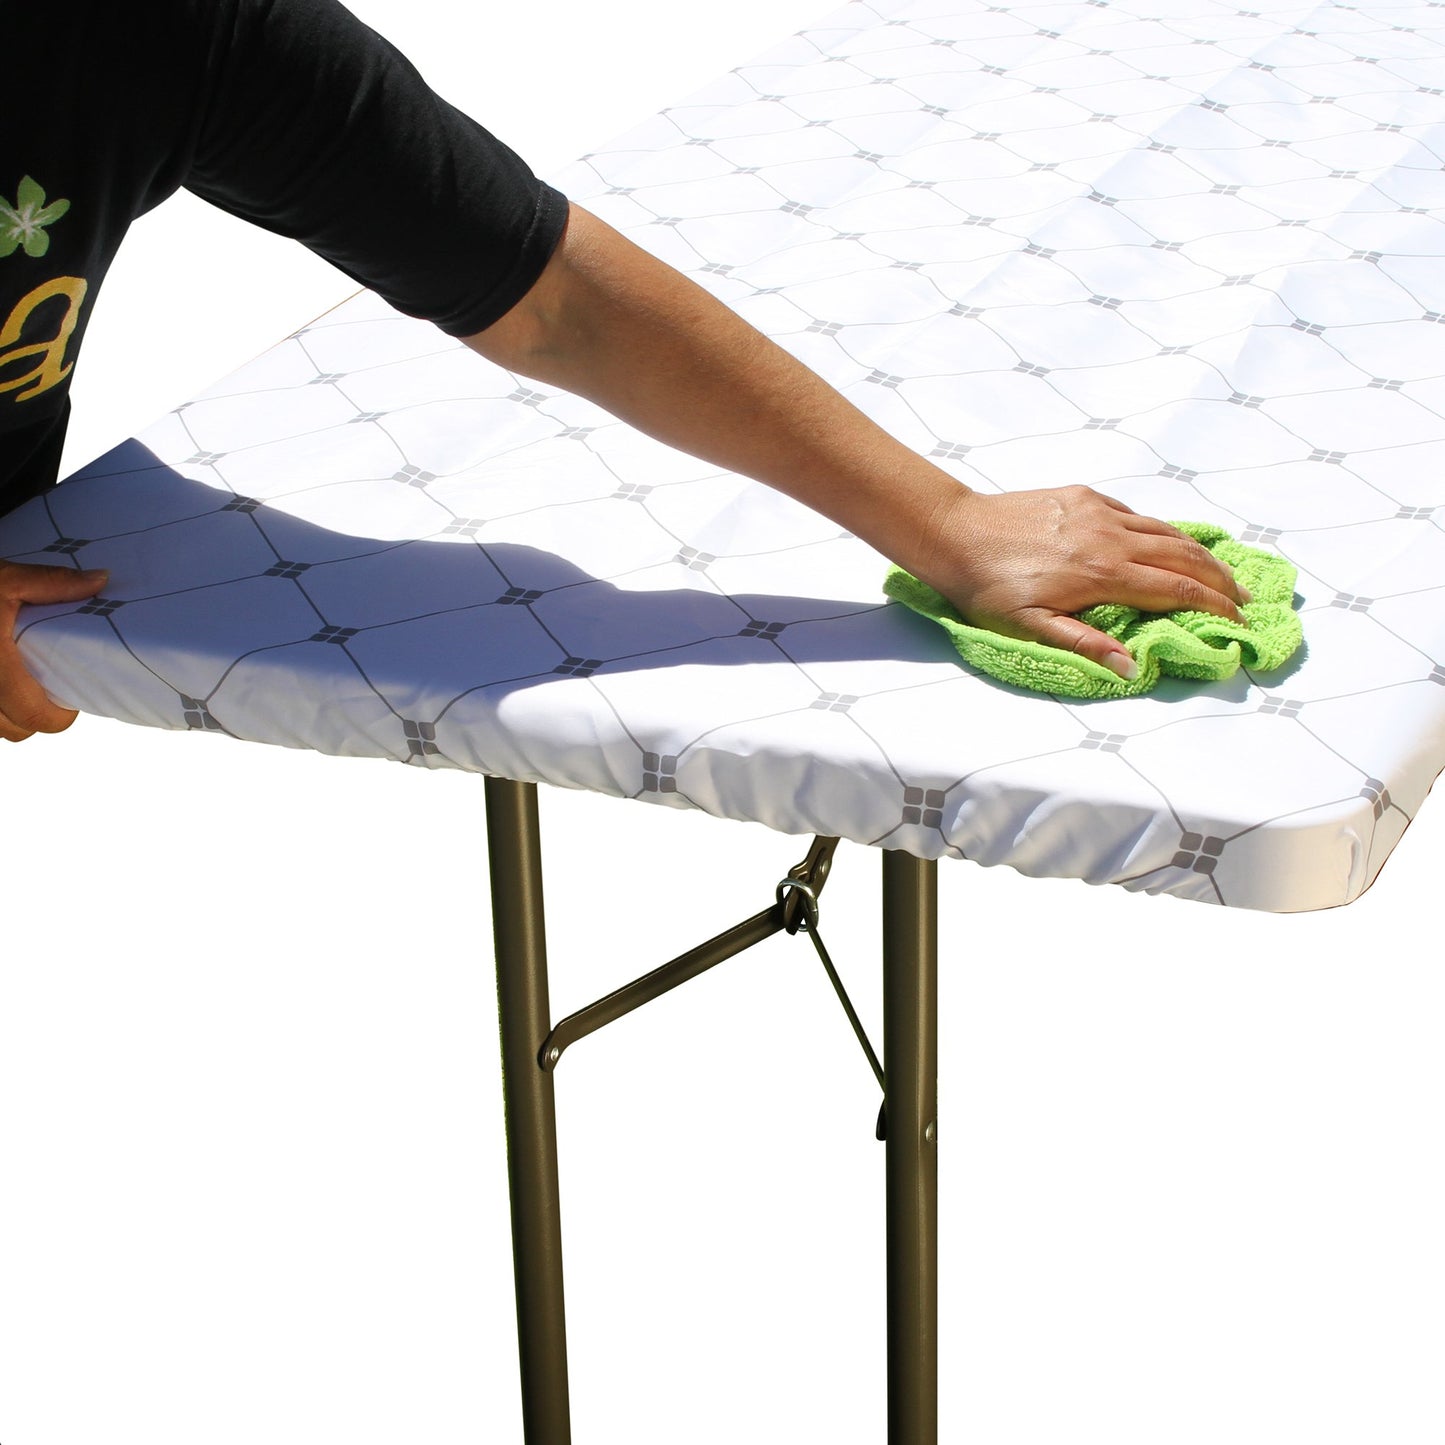 TableCloth PLUS 72" Diamonds Polyester Tablecloth for 6' Folding Tables can be wiped clean with a cloth